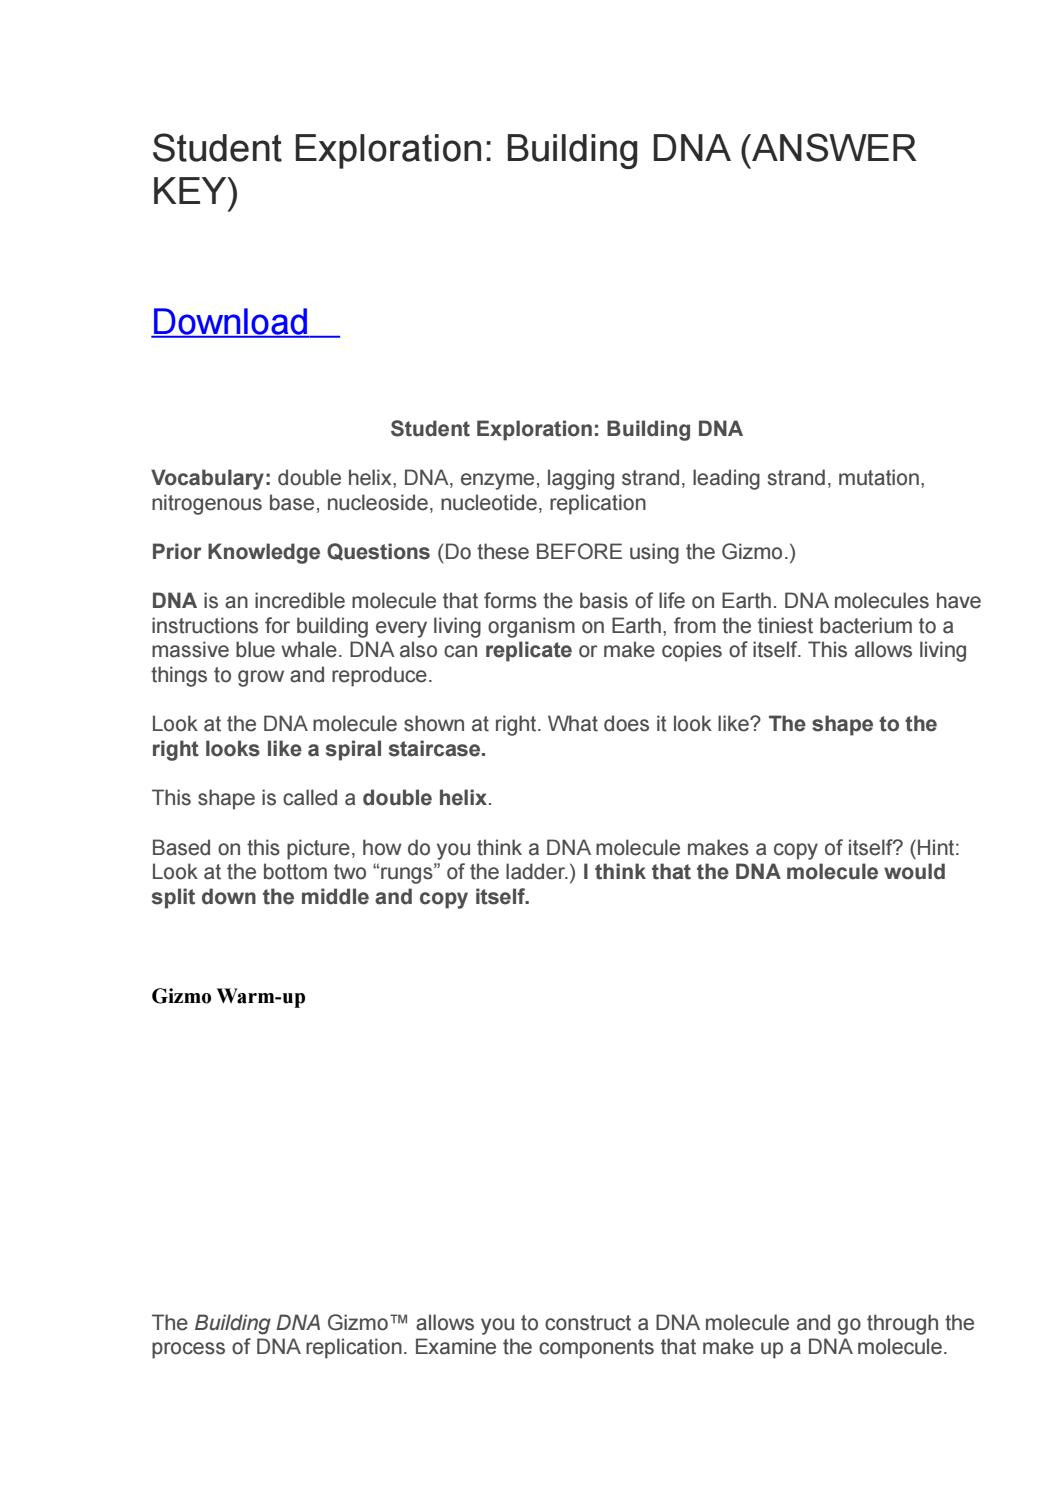 Dna Replication Worksheet Key Student Exploration Building Dna Answer Key by Dedfsf